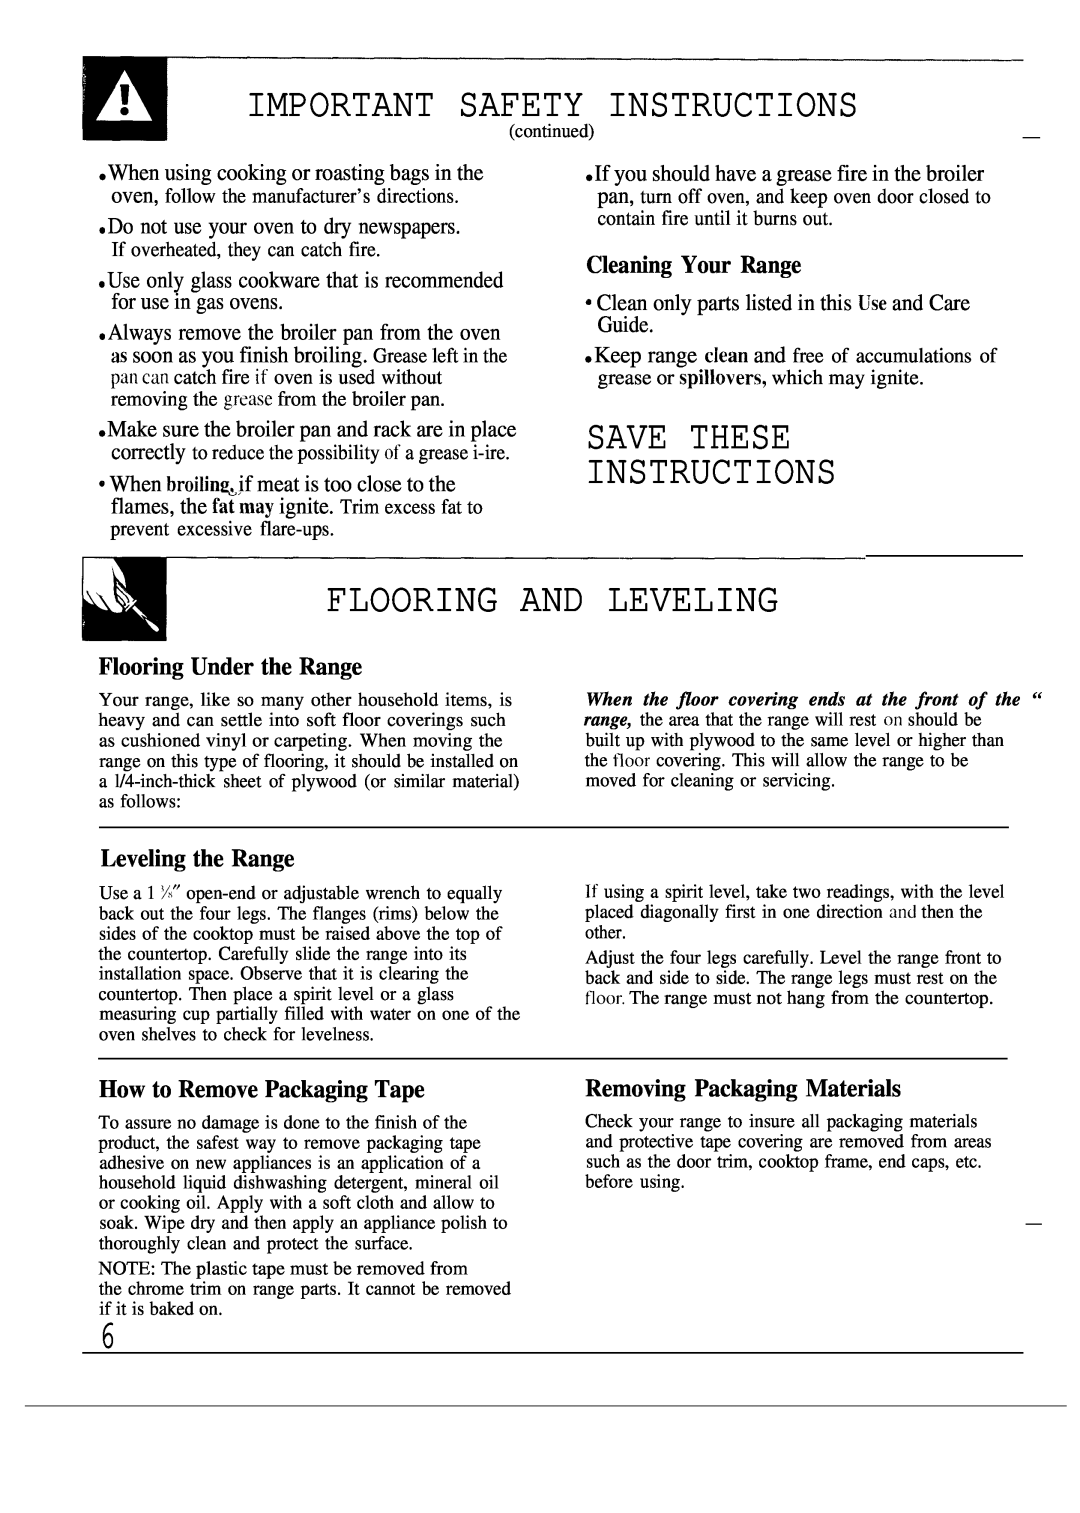 GE JGSC12 Safety Instructions, Flooring And Leveling, Cleaning Your Range, Flooring Under the Range, Leveling the Range 